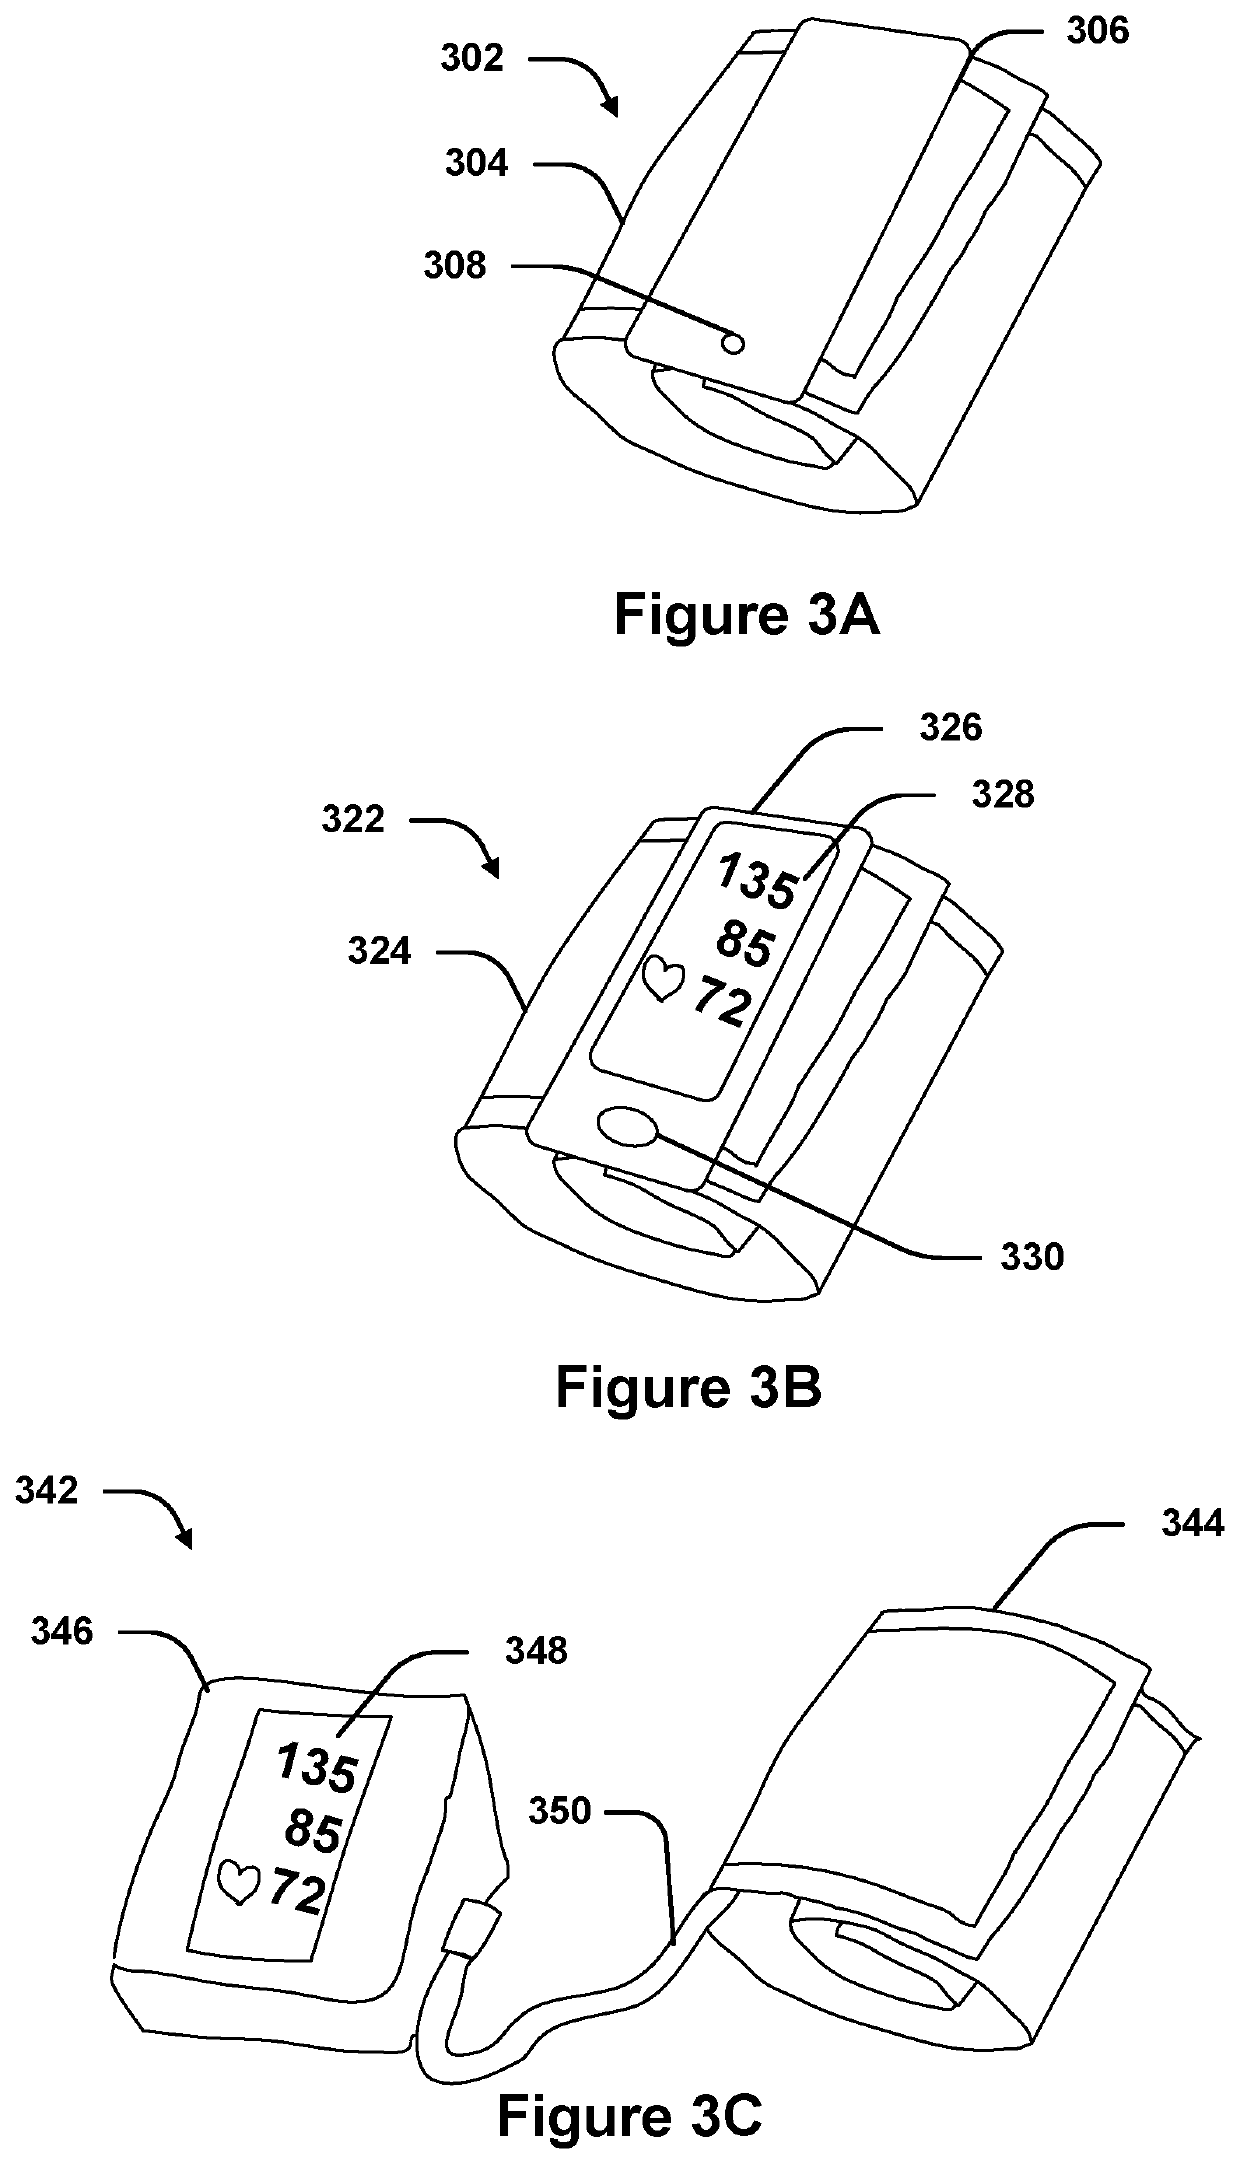 Intelligent inflatable cuff for arm-based blood pressure measurement